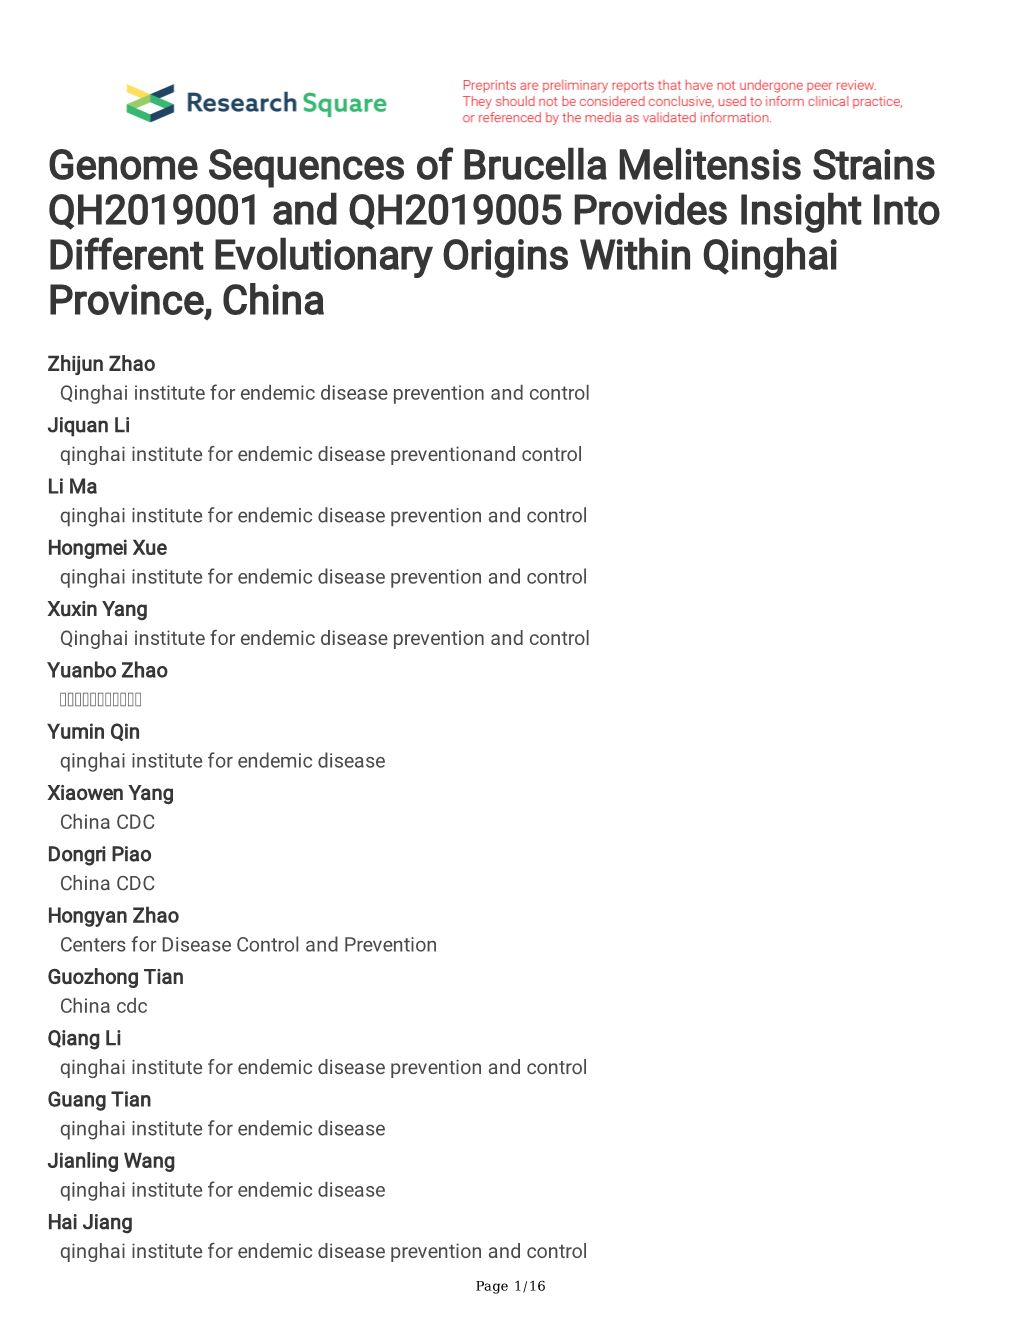 Genome Sequences of Brucella Melitensis Strains QH2019001 and QH2019005 Provides Insight Into Different Evolutionary Origins Within Qinghai Province, China